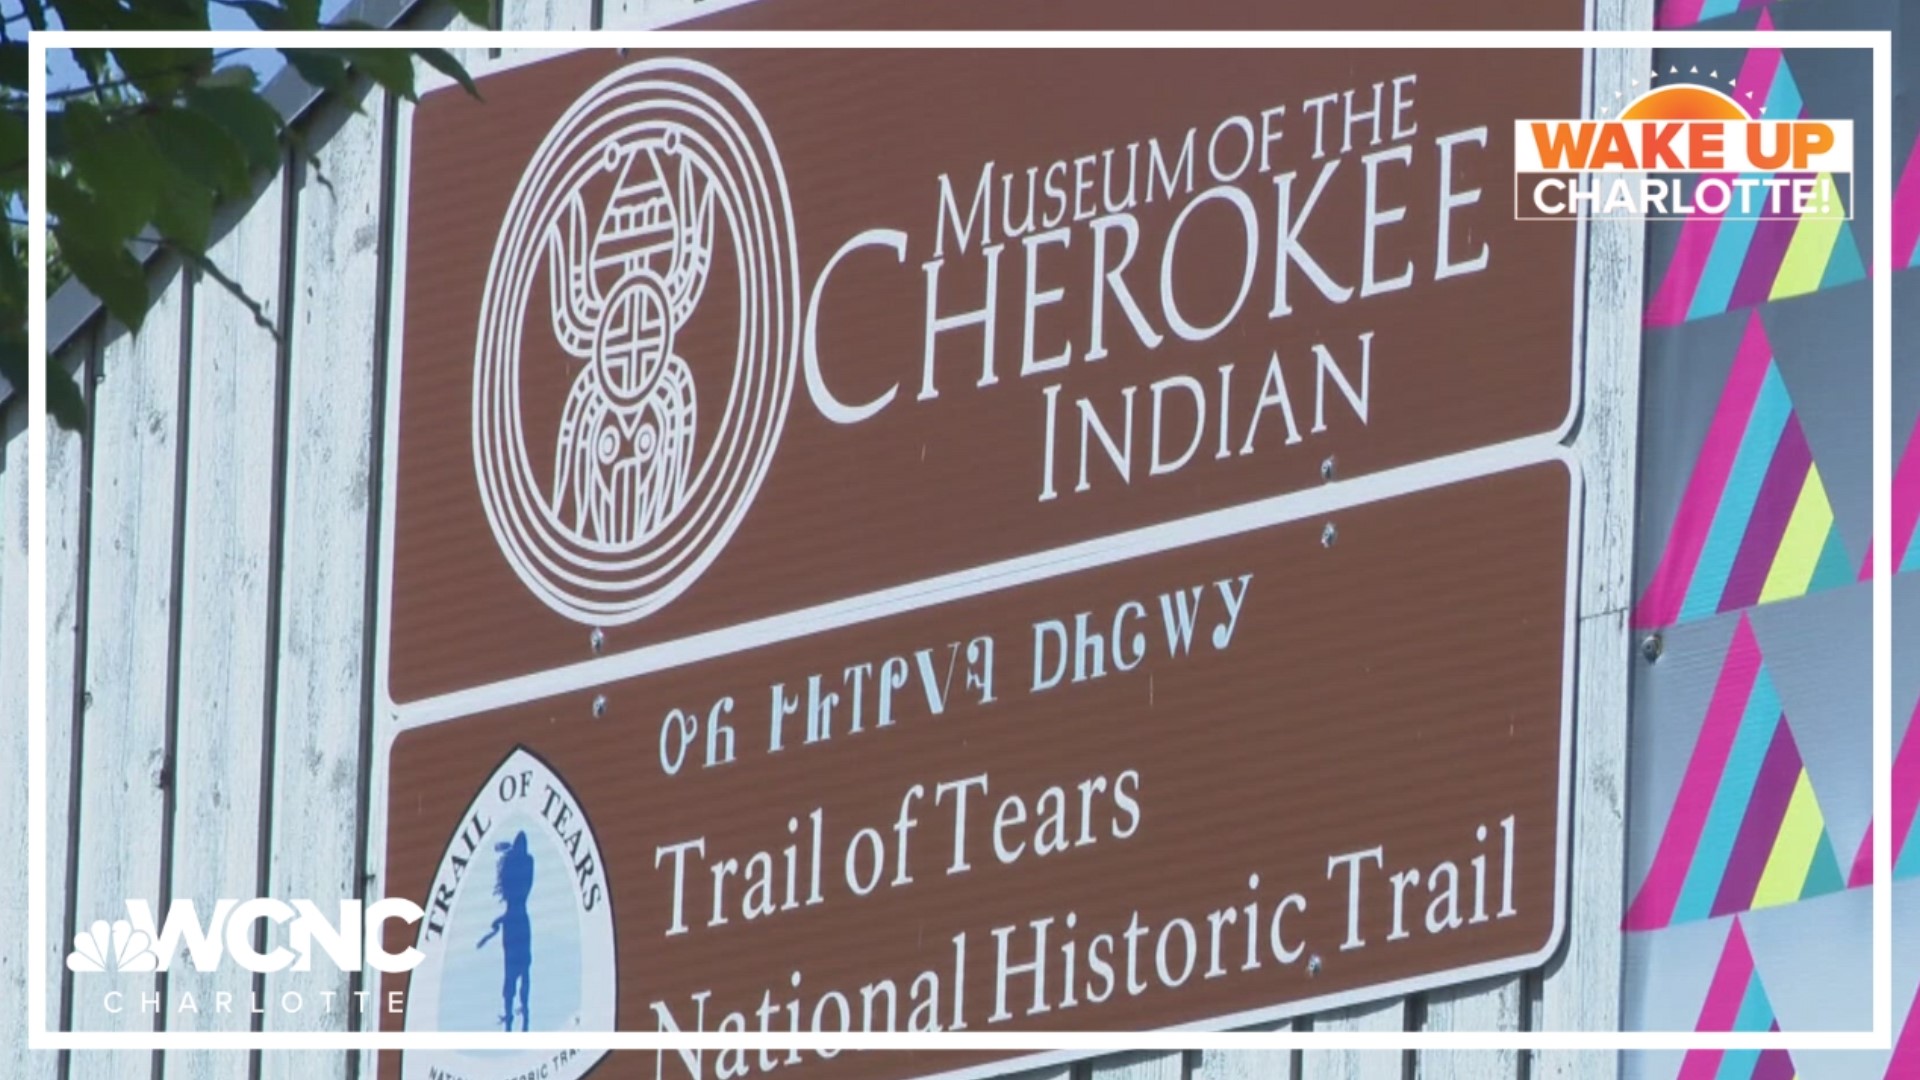 WCNC Charlotte’s Sarah French took a trip up to Cherokee, North Carolina, to learn more about what the museum has to offer those who walk through the door.